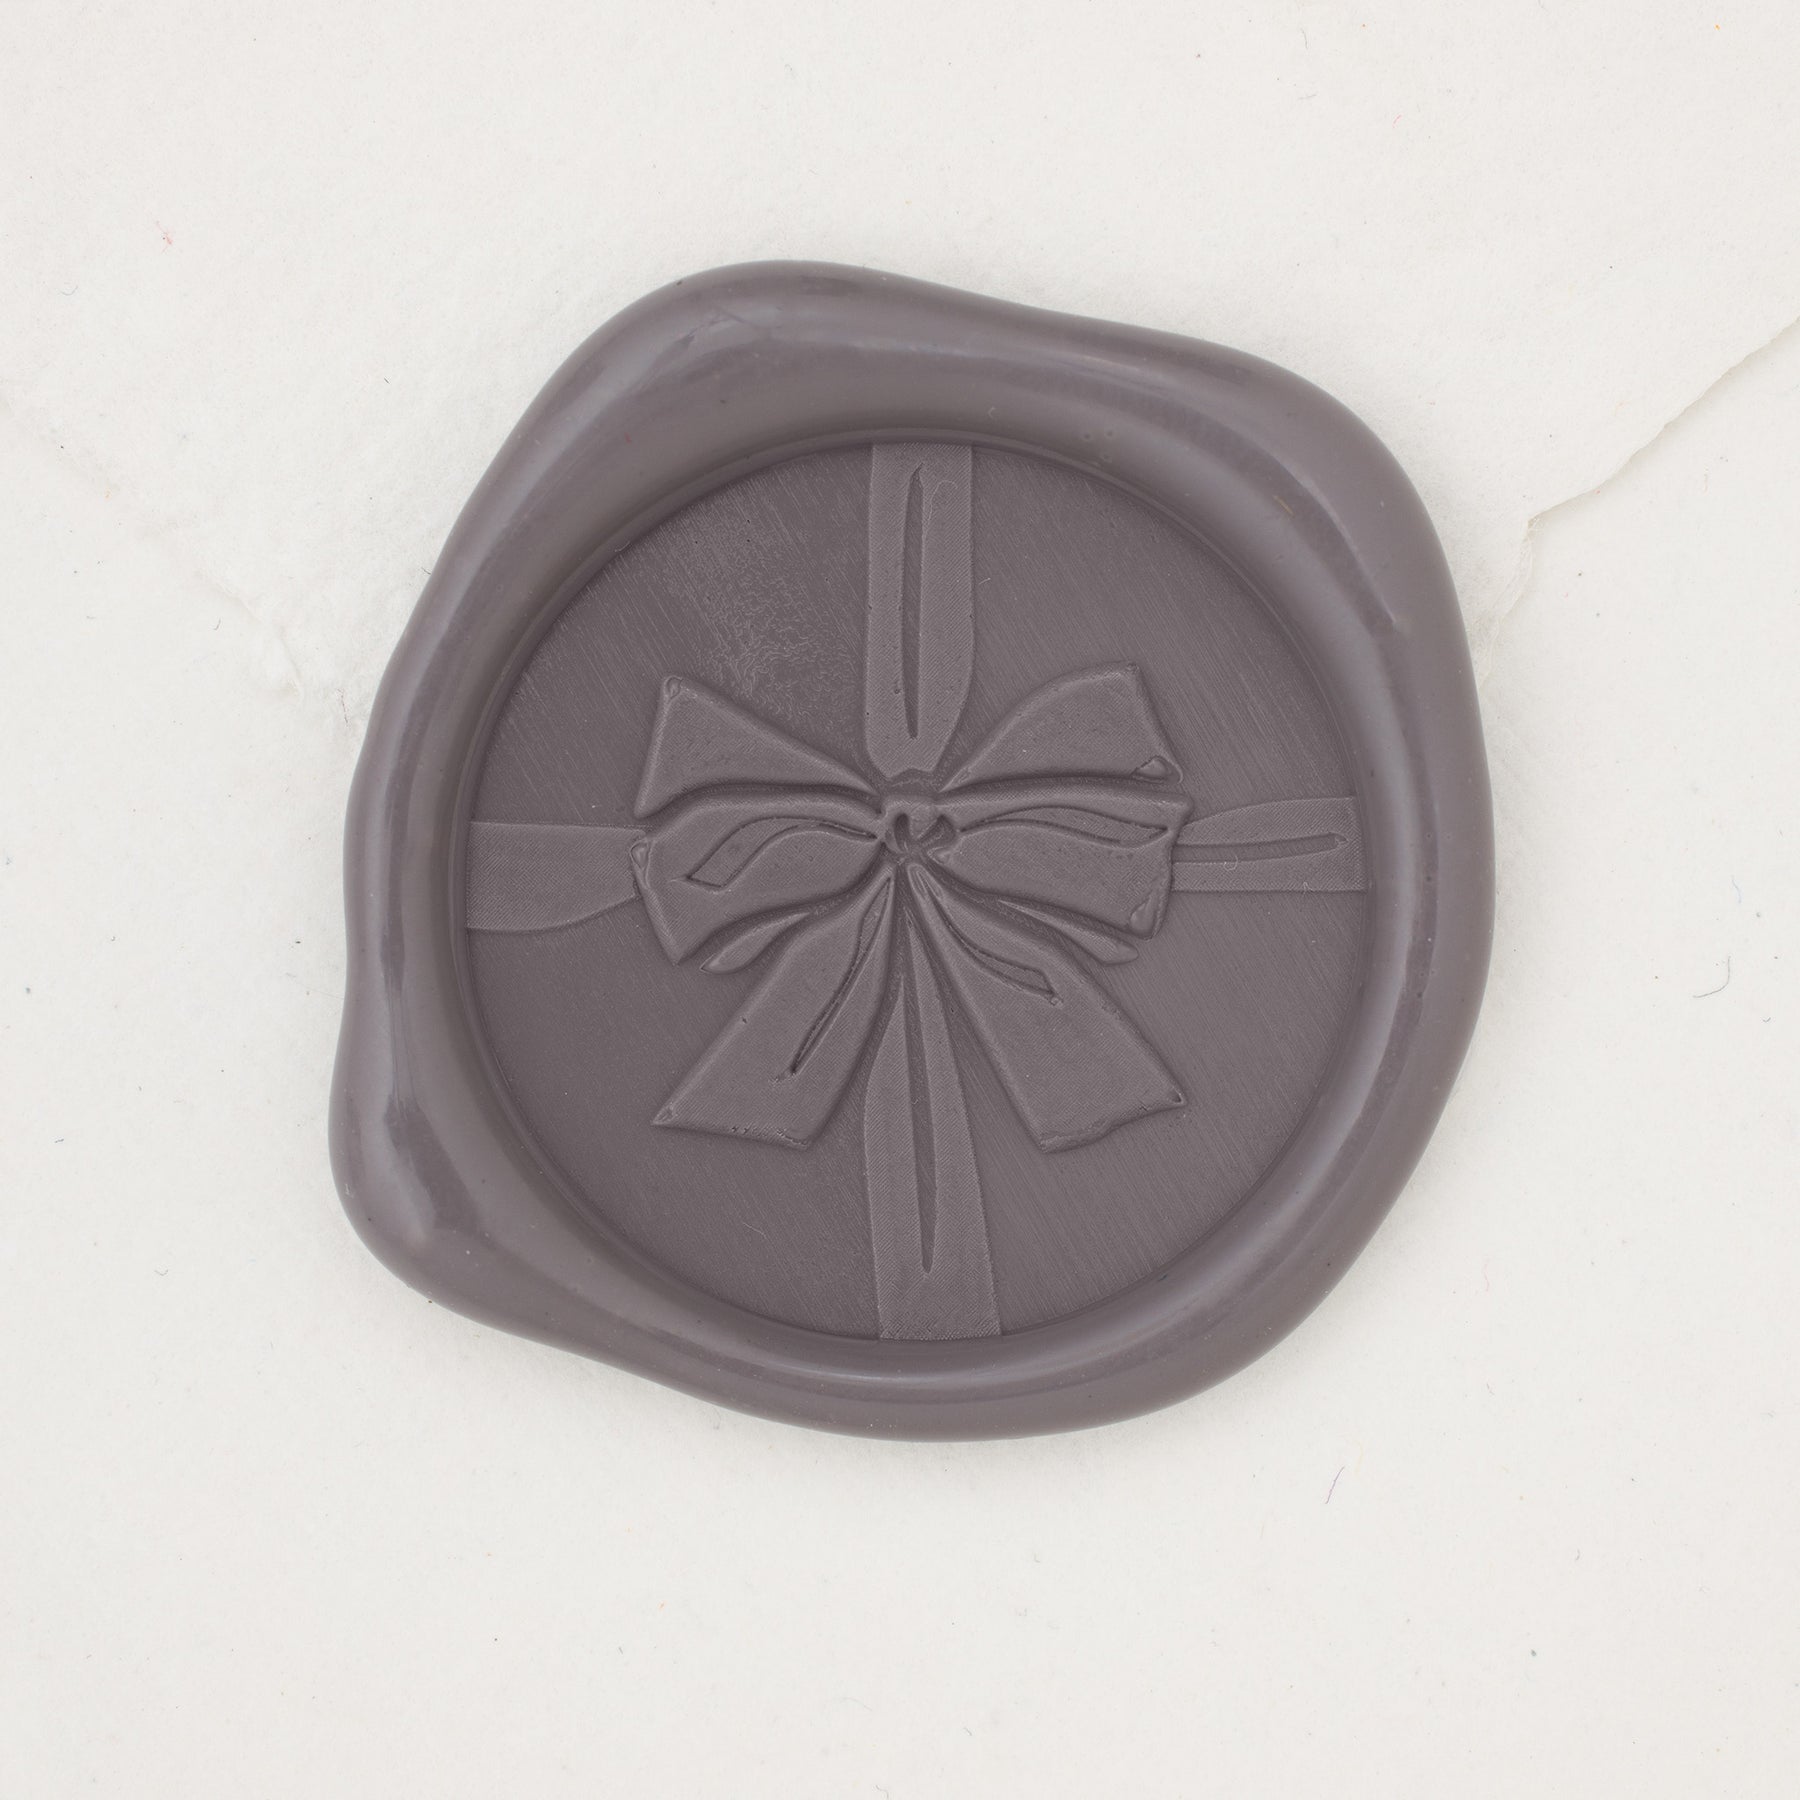 Wrapped Wax Seals